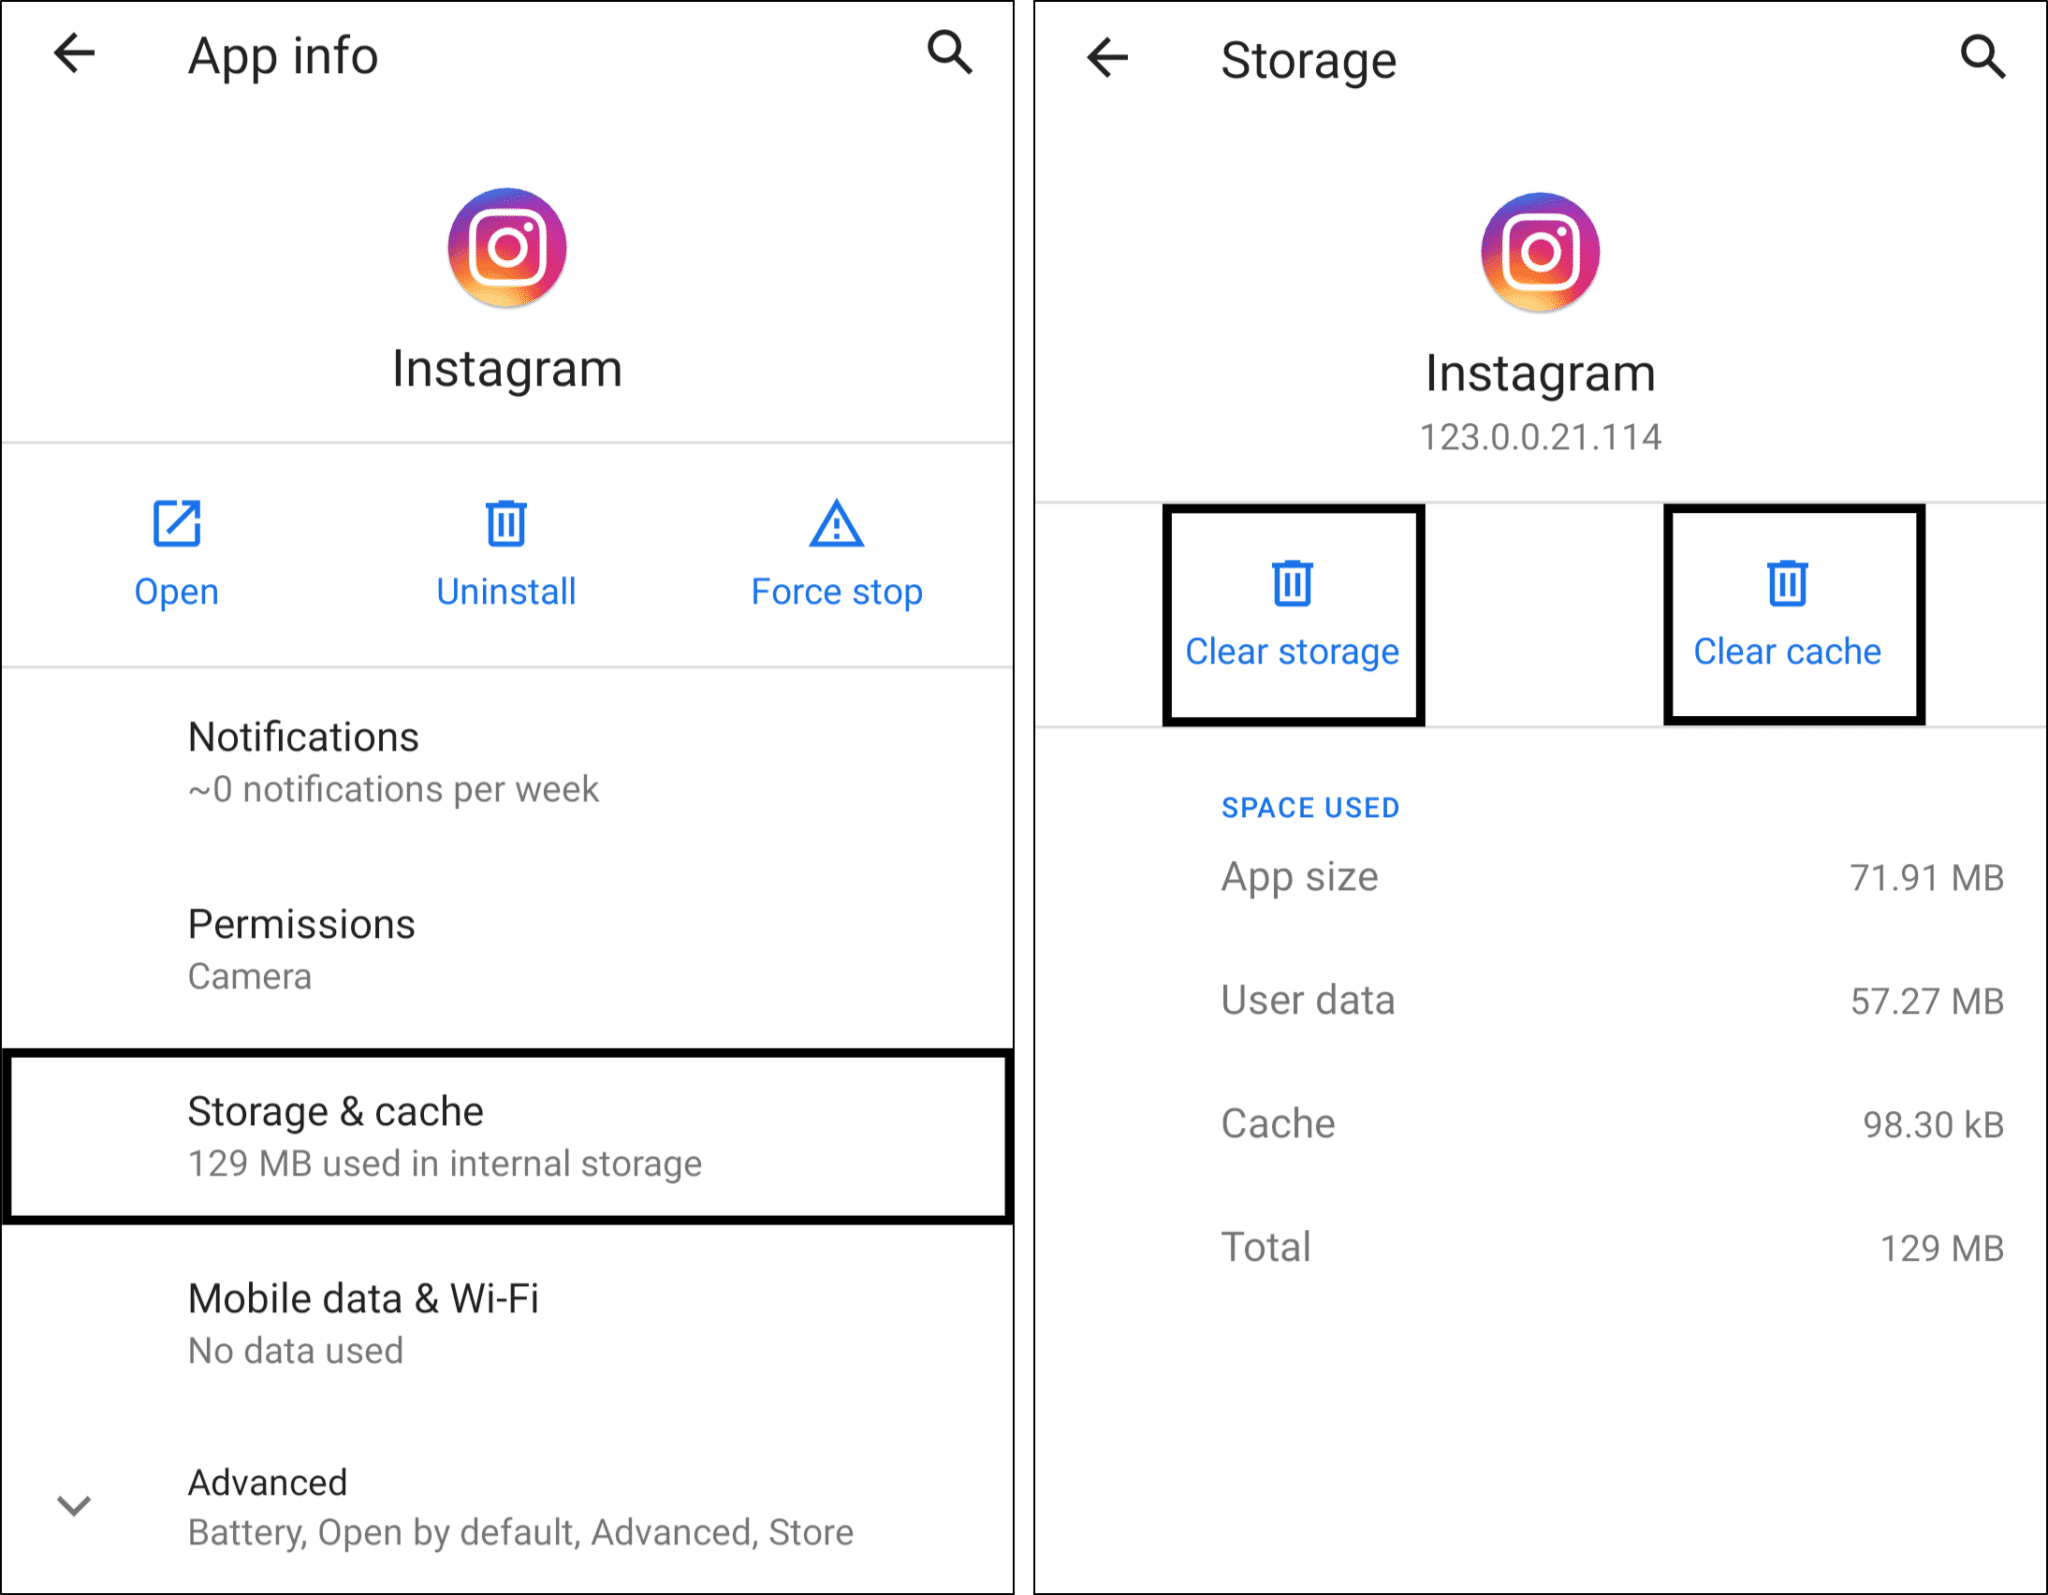 clear instagram cache and app data on android to fix comments not showing, "Couldn't post", or blocked